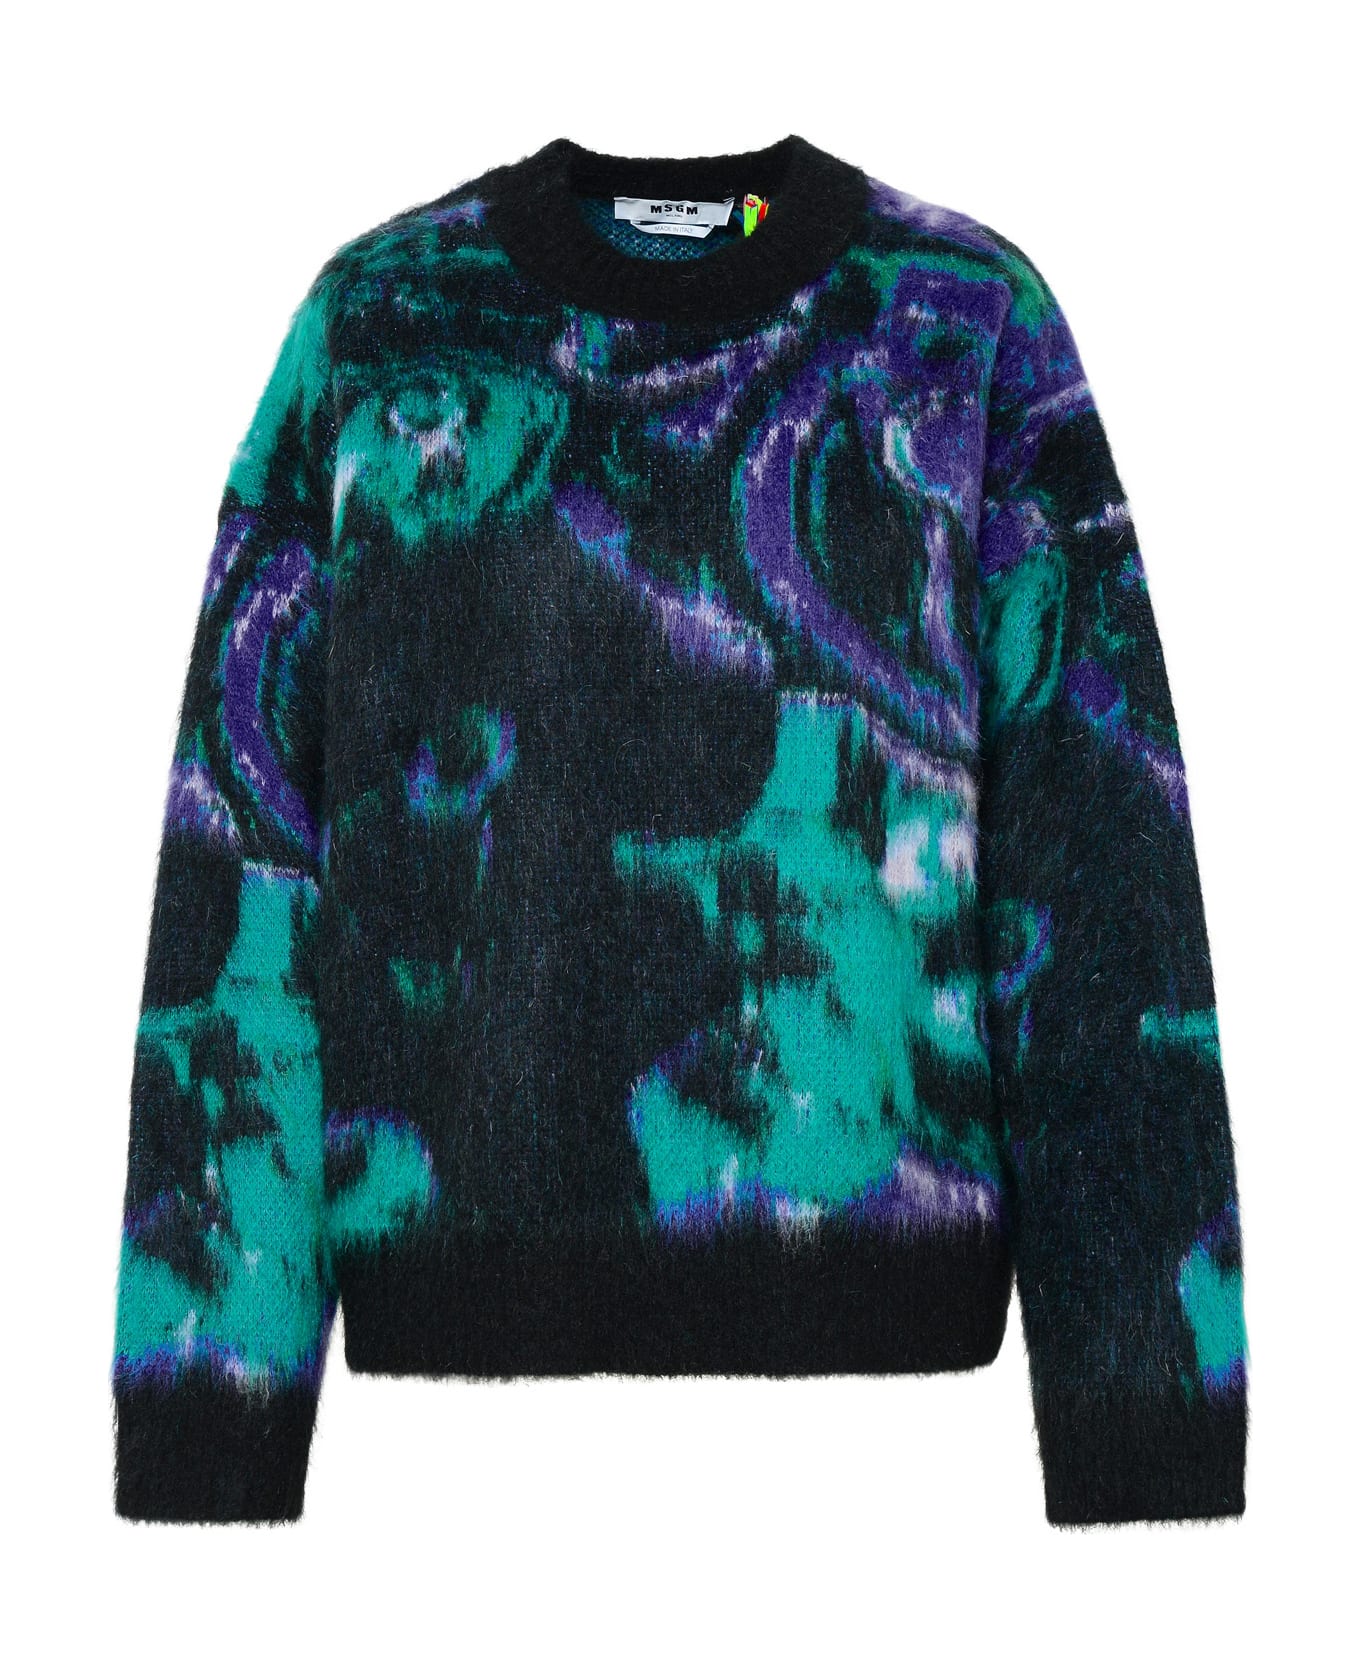 MSGM Black Brushed Mohair Blend Sweater - Green